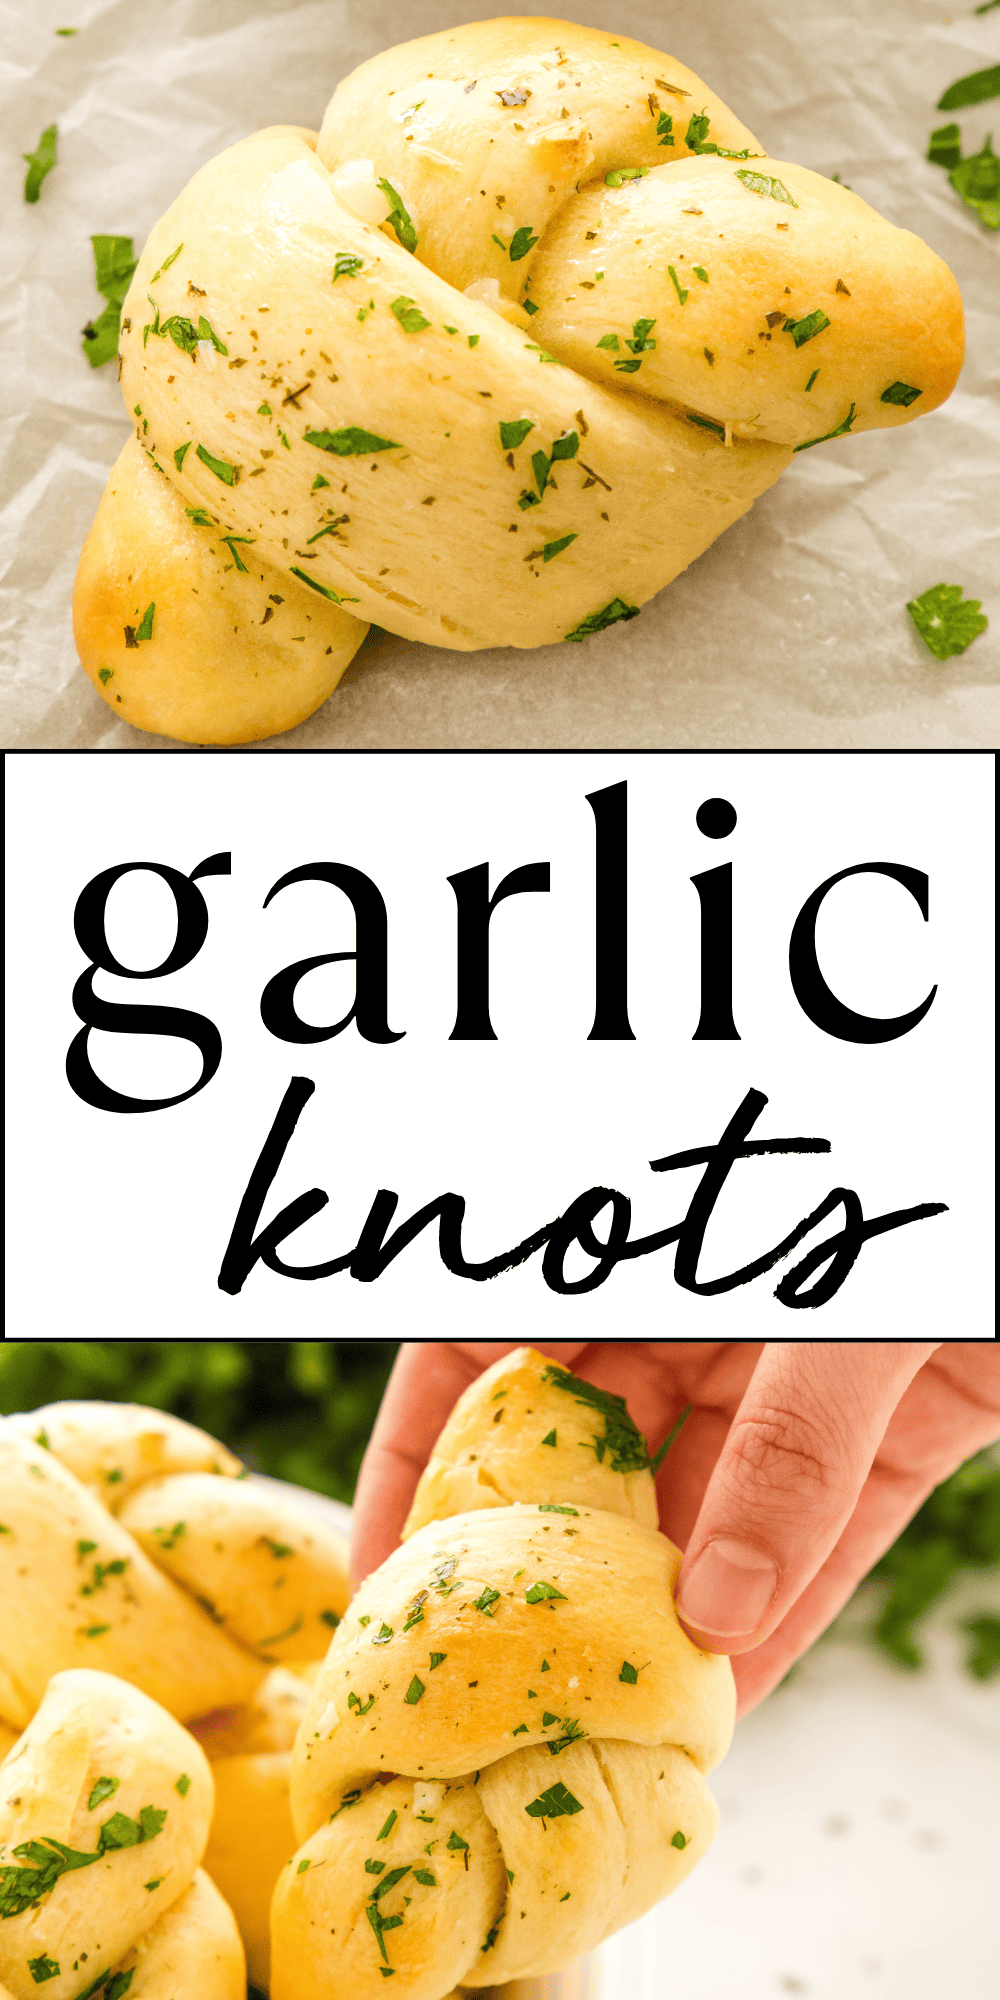 This Garlic Knots recipe makes the perfect fluffy rolls topped with savoury garlic butter. An easy, soft and buttery garlic knot recipe for beginners - with PRO tips! Recipe from thebusybaker.ca! #garlicknots #garlicknotsrecipe #garlicknotrecipe #garlicknot #appetizer #rolls #garlic #easyrolls #garlicrolls via @busybakerblog